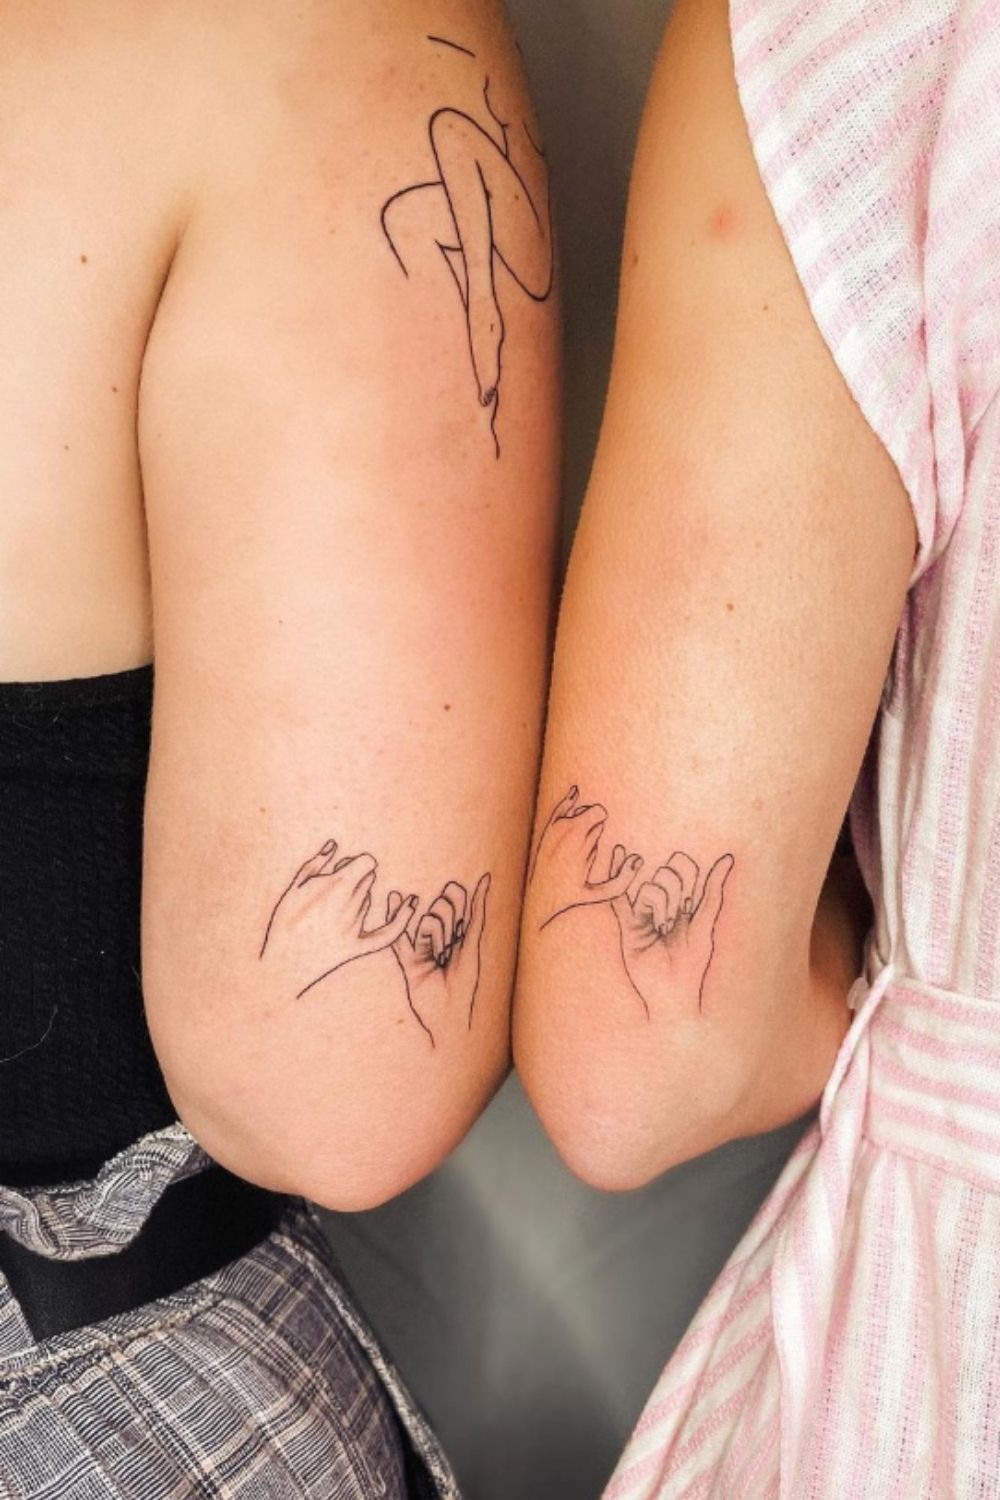 Best friend tattoo | tattoos to Celebrate your special bond